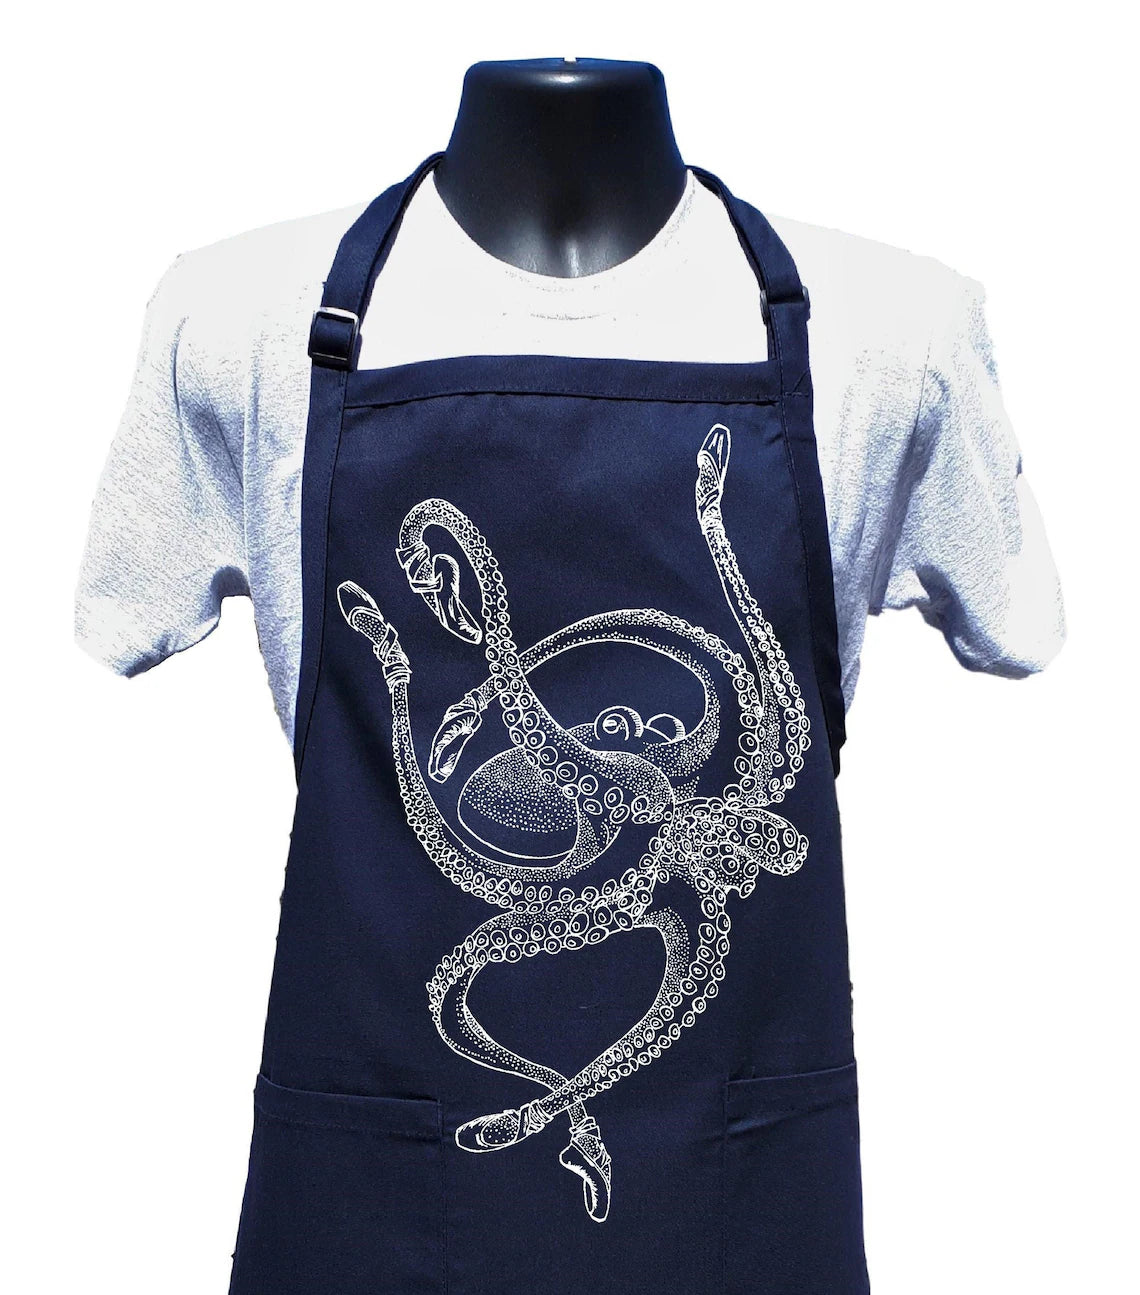 Octopus Ballet Dancer Chef's Apron with Pockets